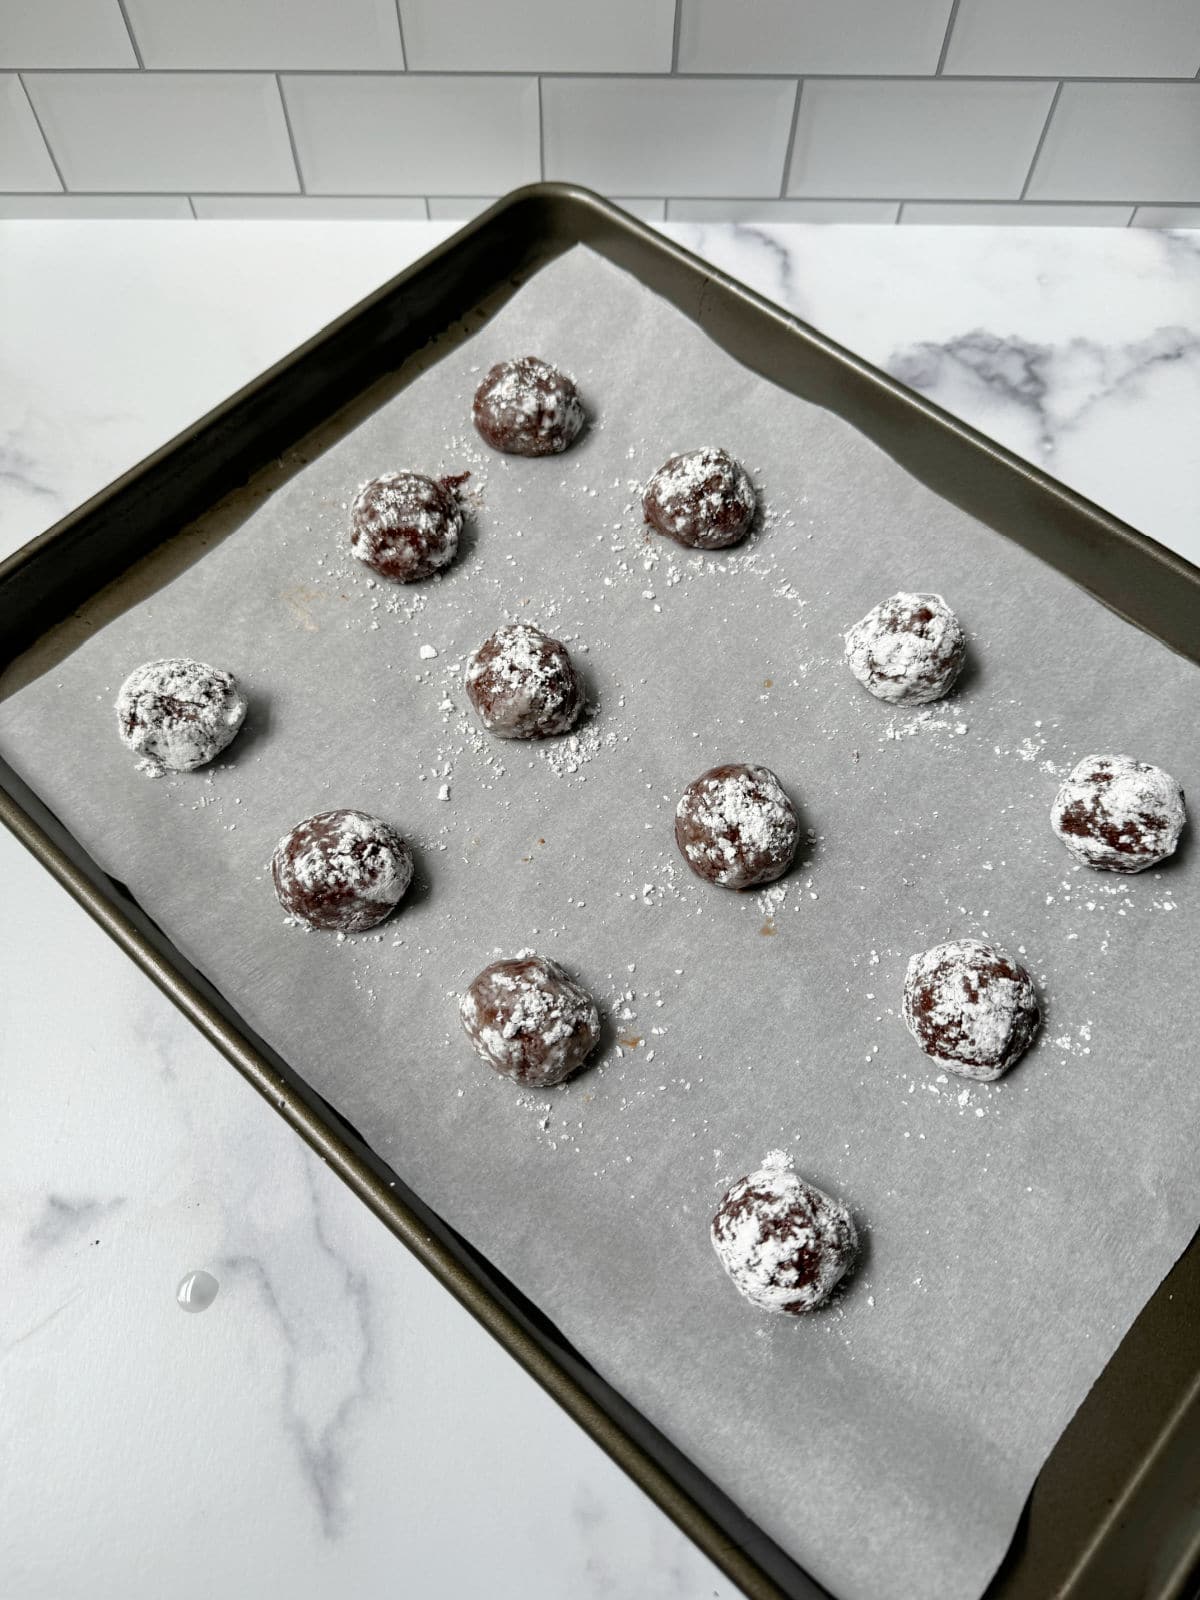 Chocolate dough balls covered in powdered sugar on parchment on baking tray.